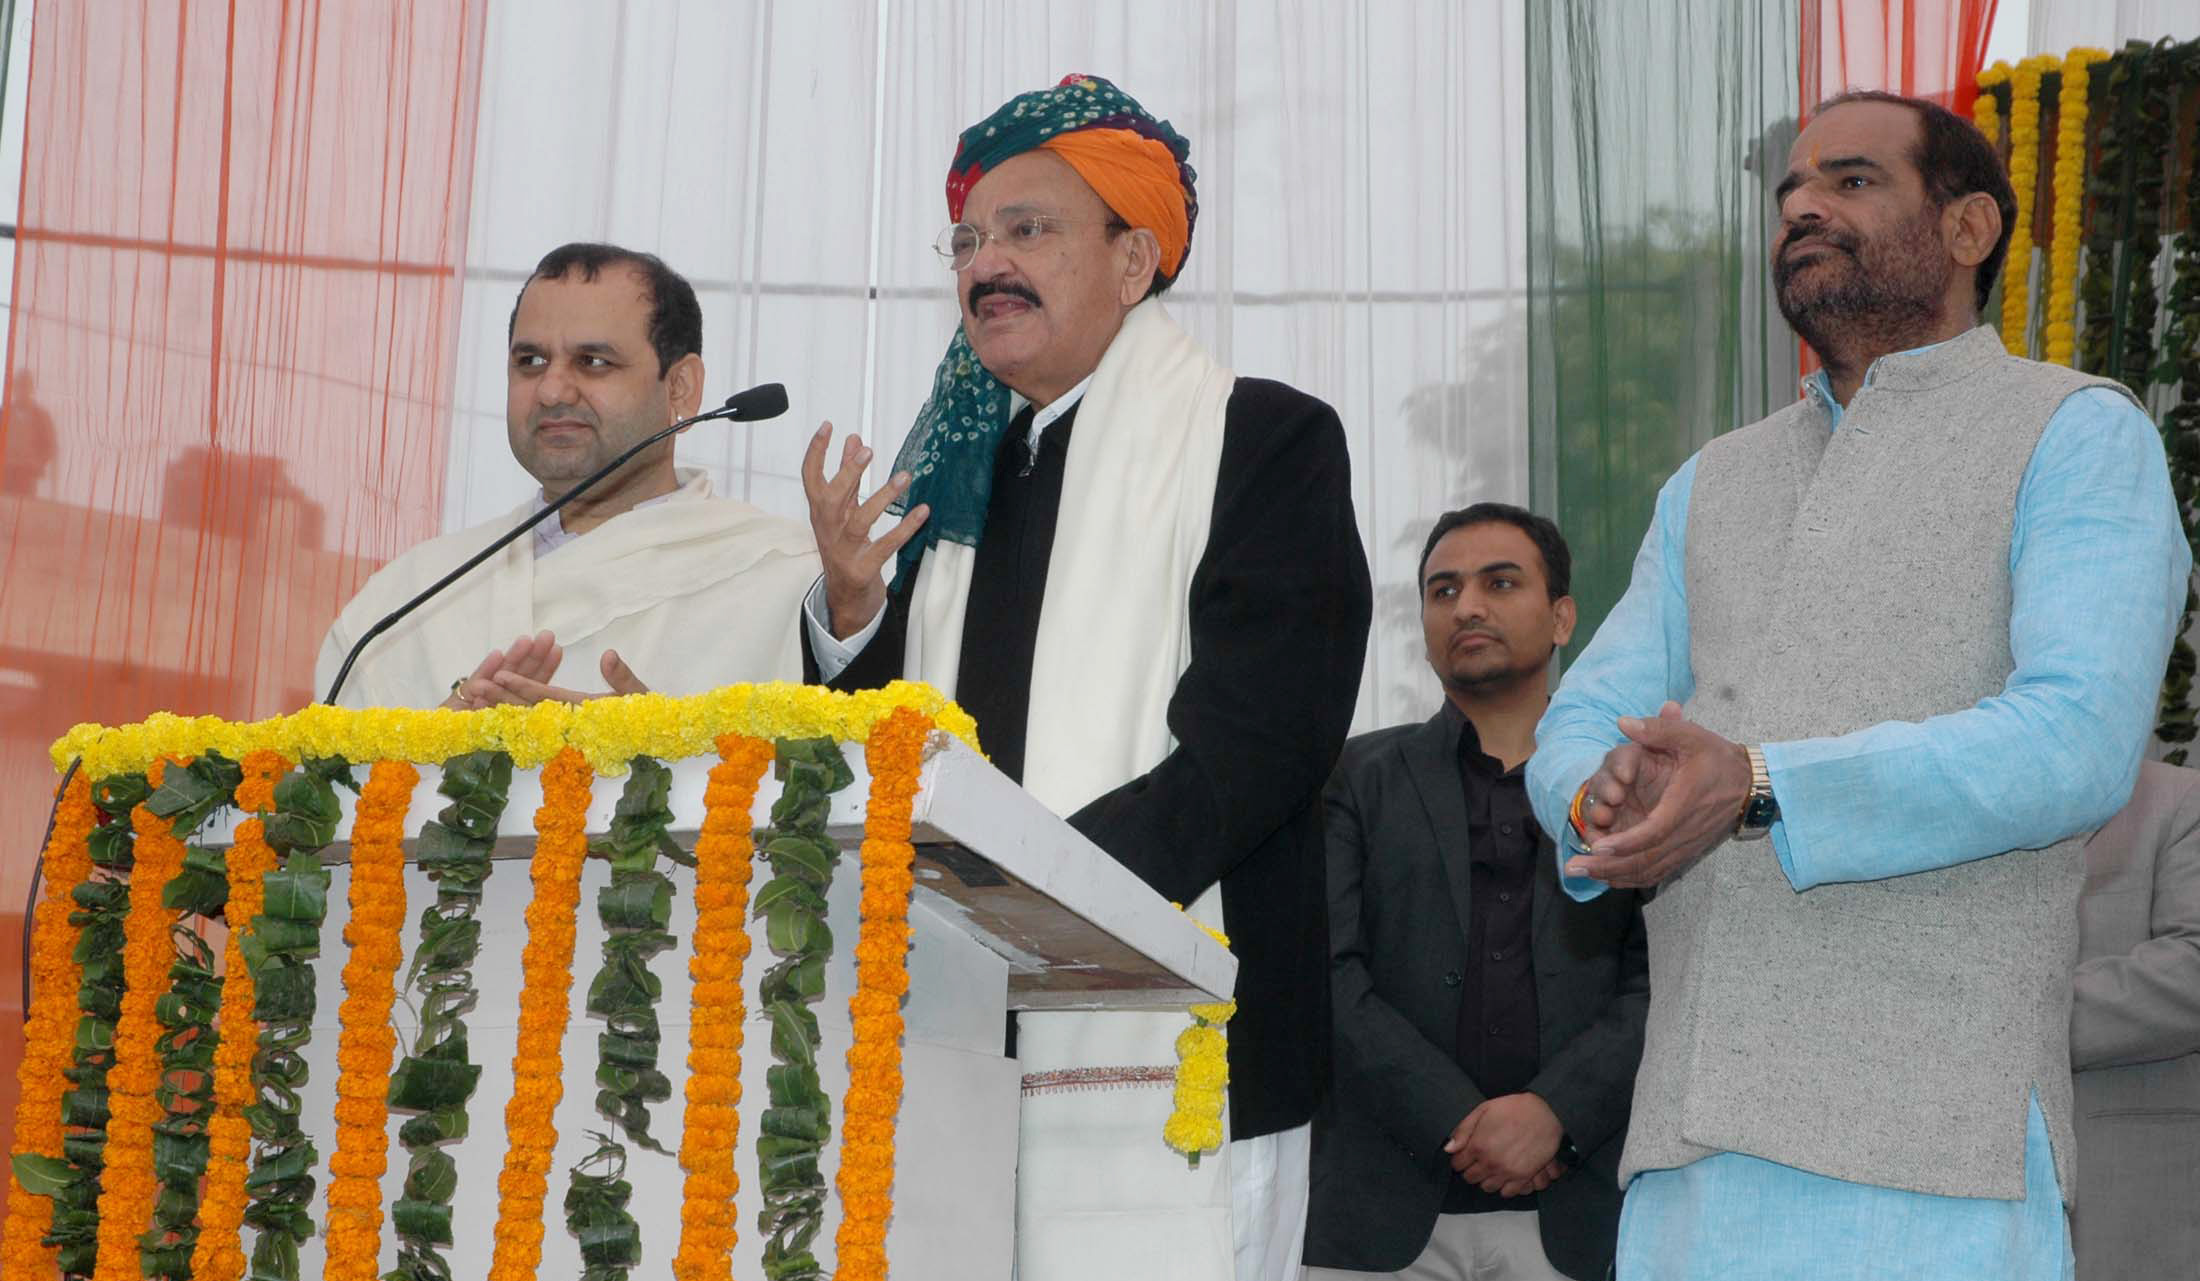 The Union Minister for Urban Development, Housing and Urban Poverty Alleviation and..